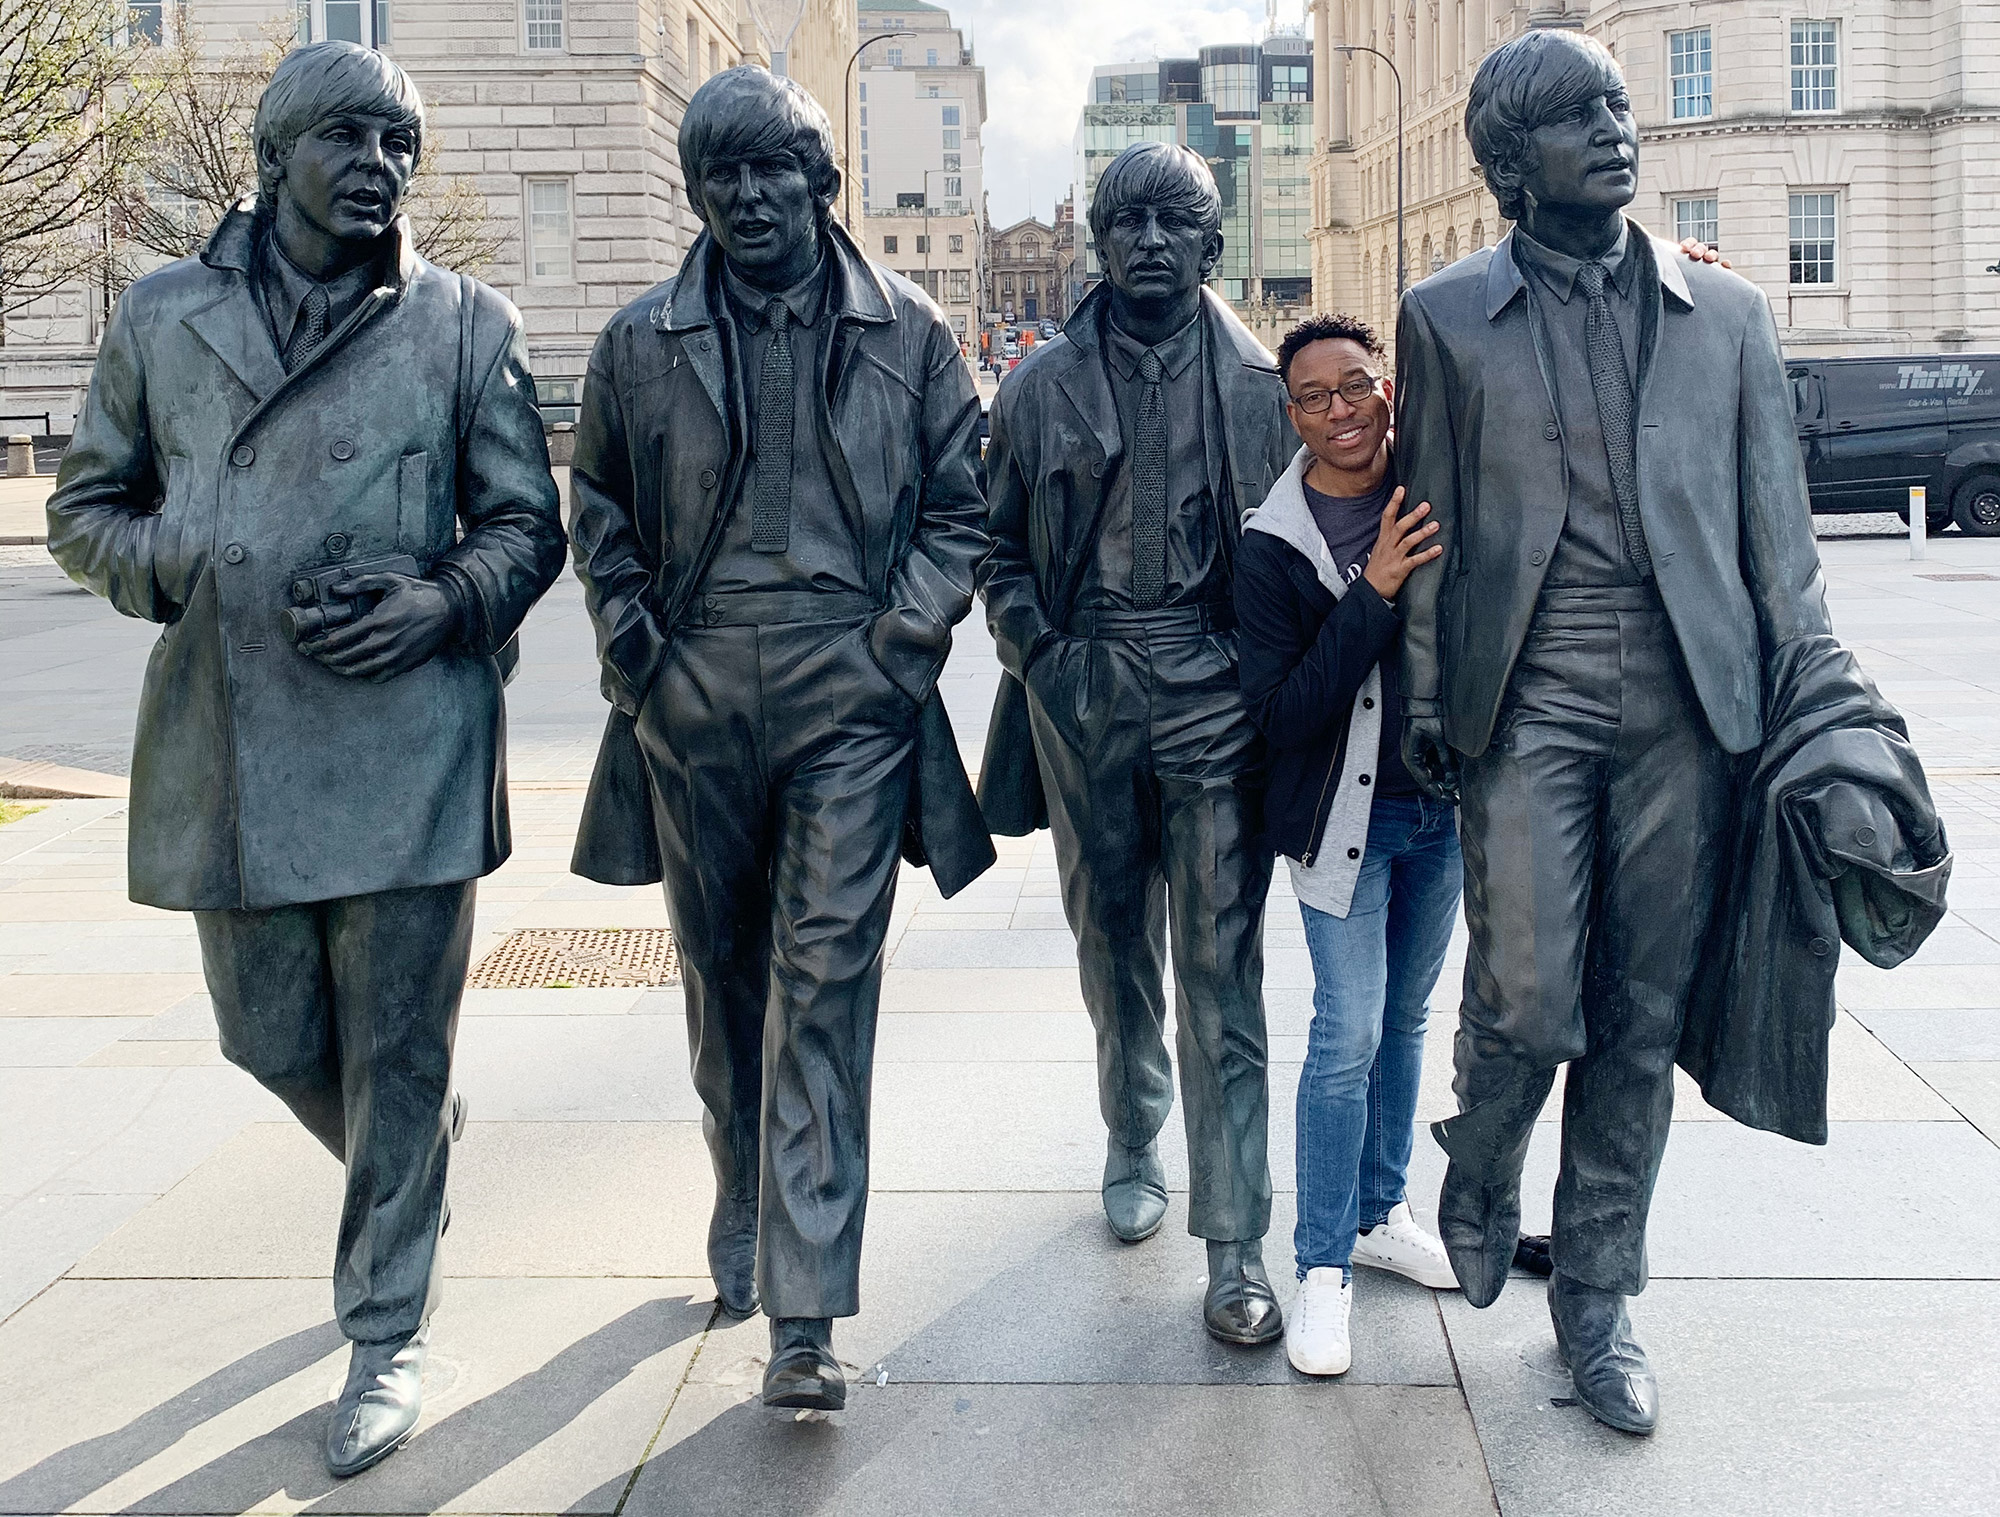 Krull magazine. Erick Taylor Woodby with Beatles statue in Liverpool, England